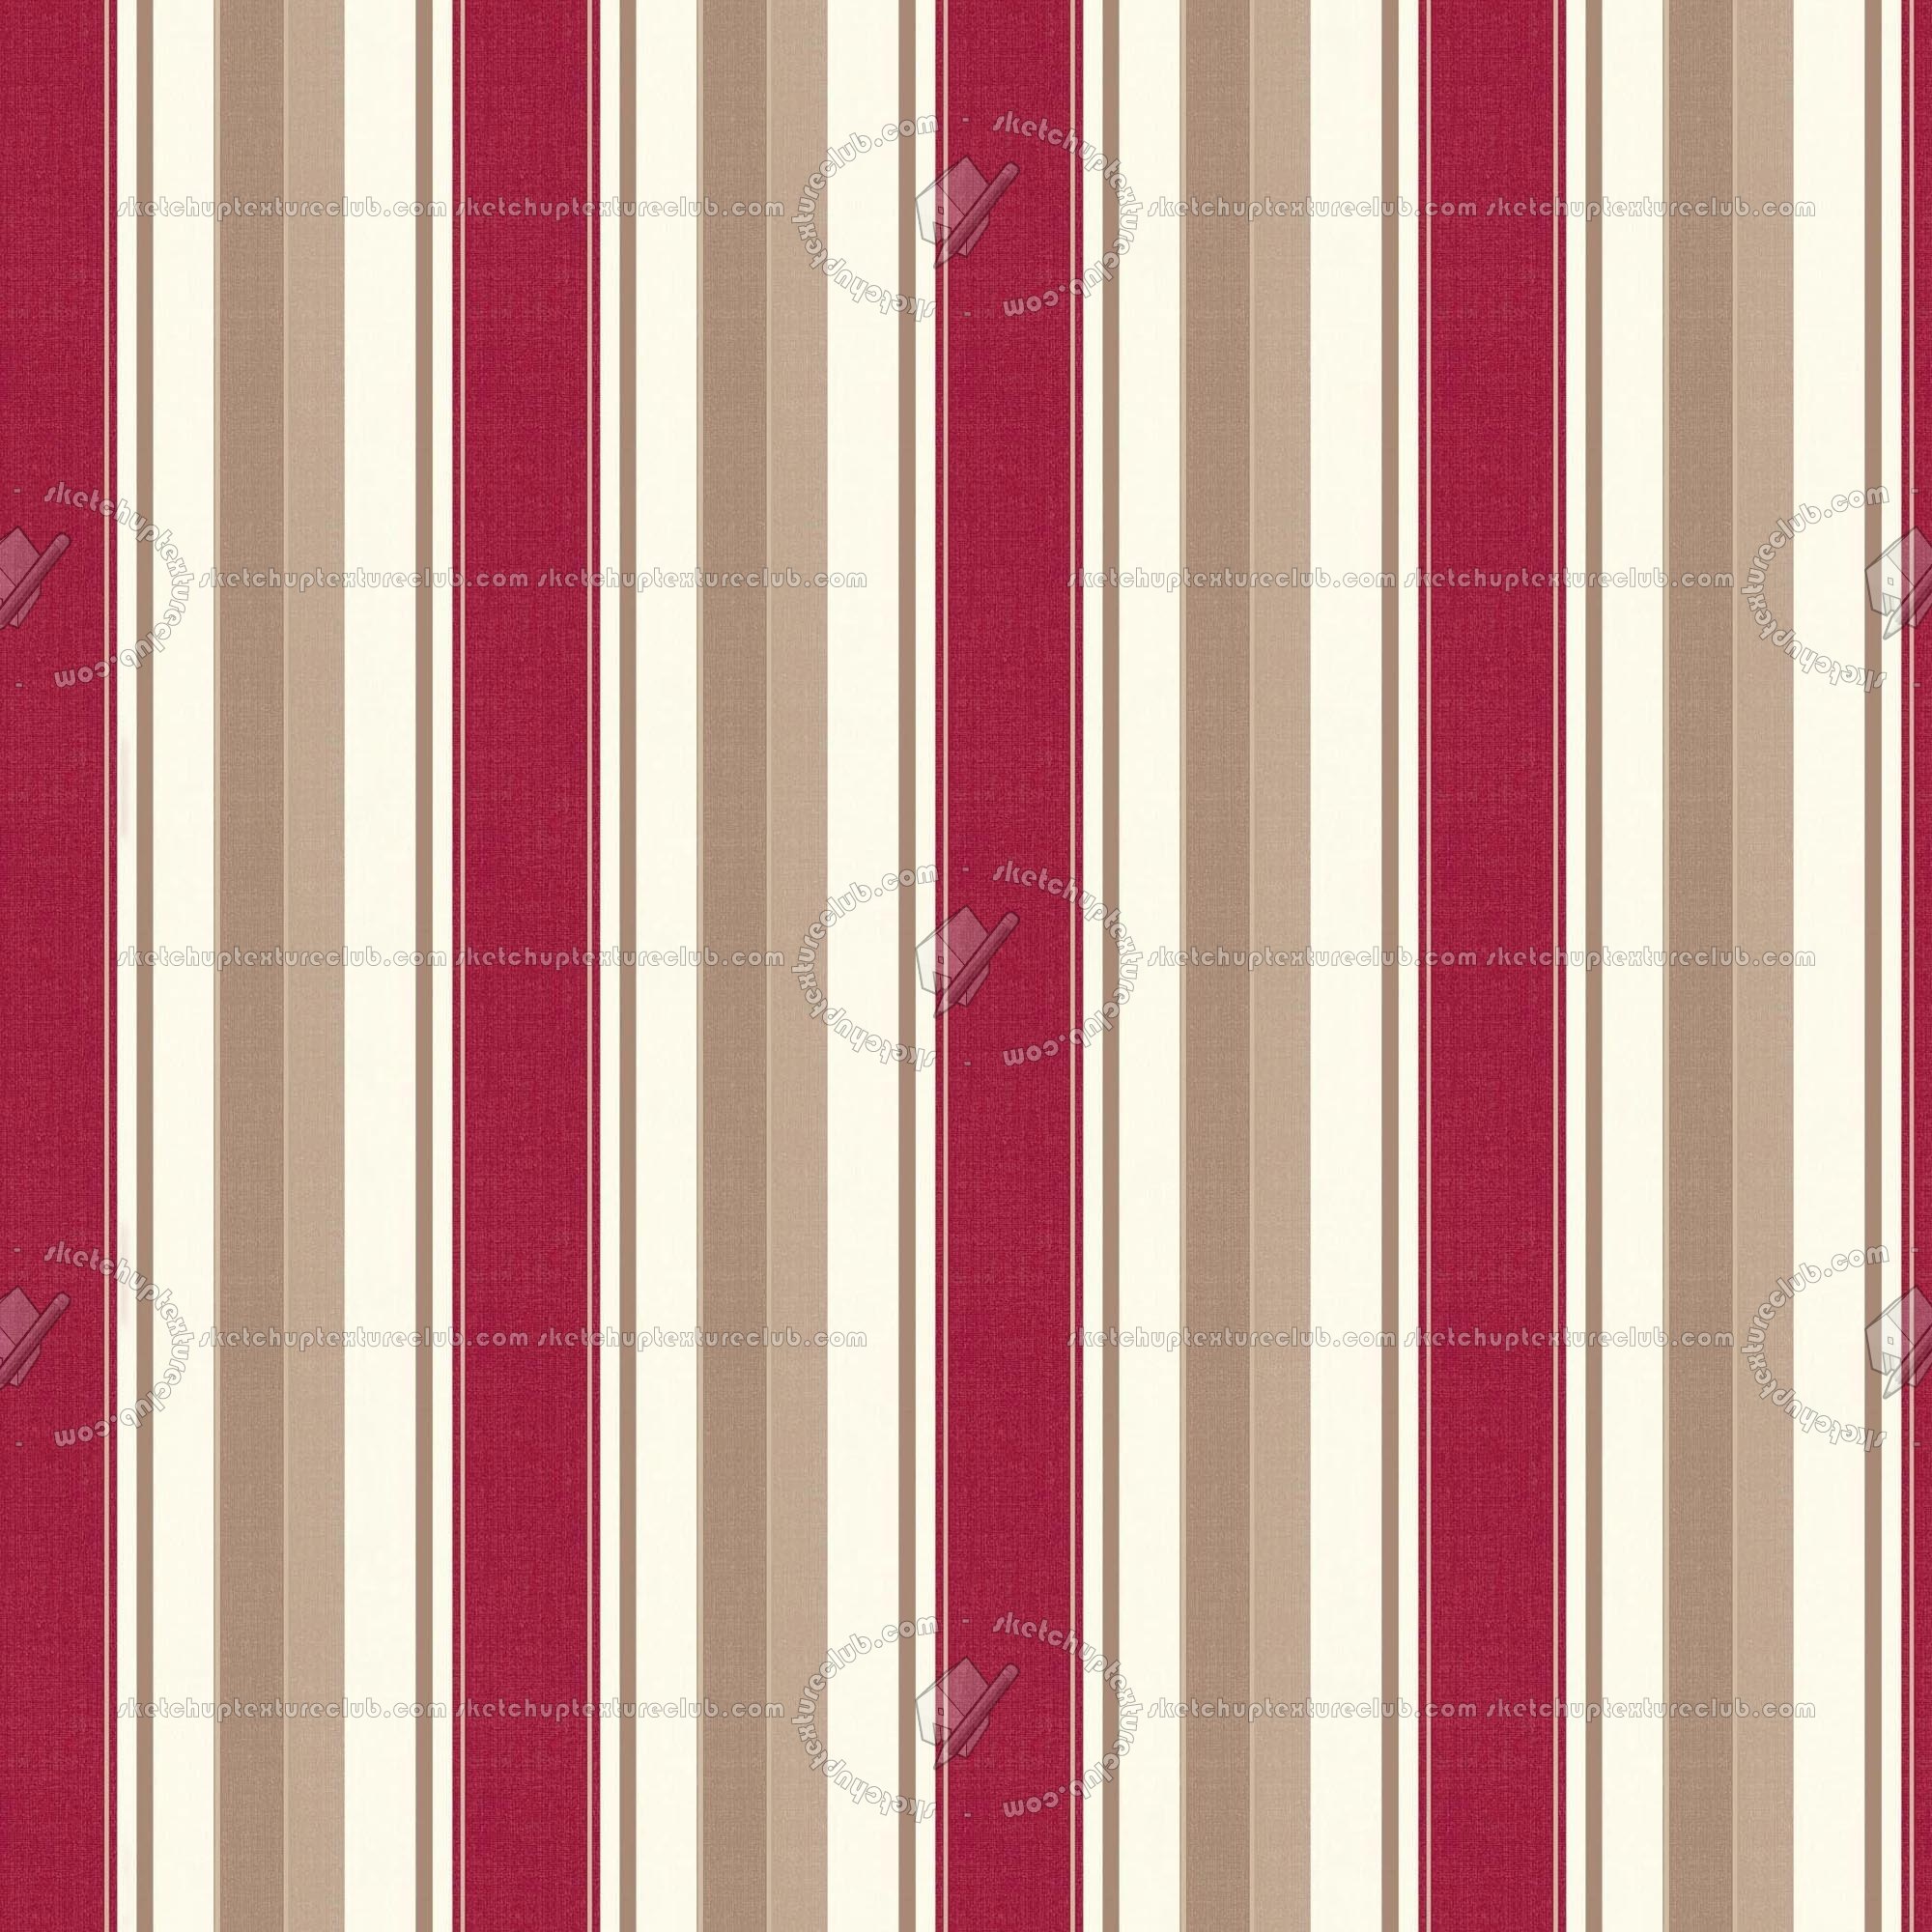 material wallpaper,red,pink,line,pattern,material property